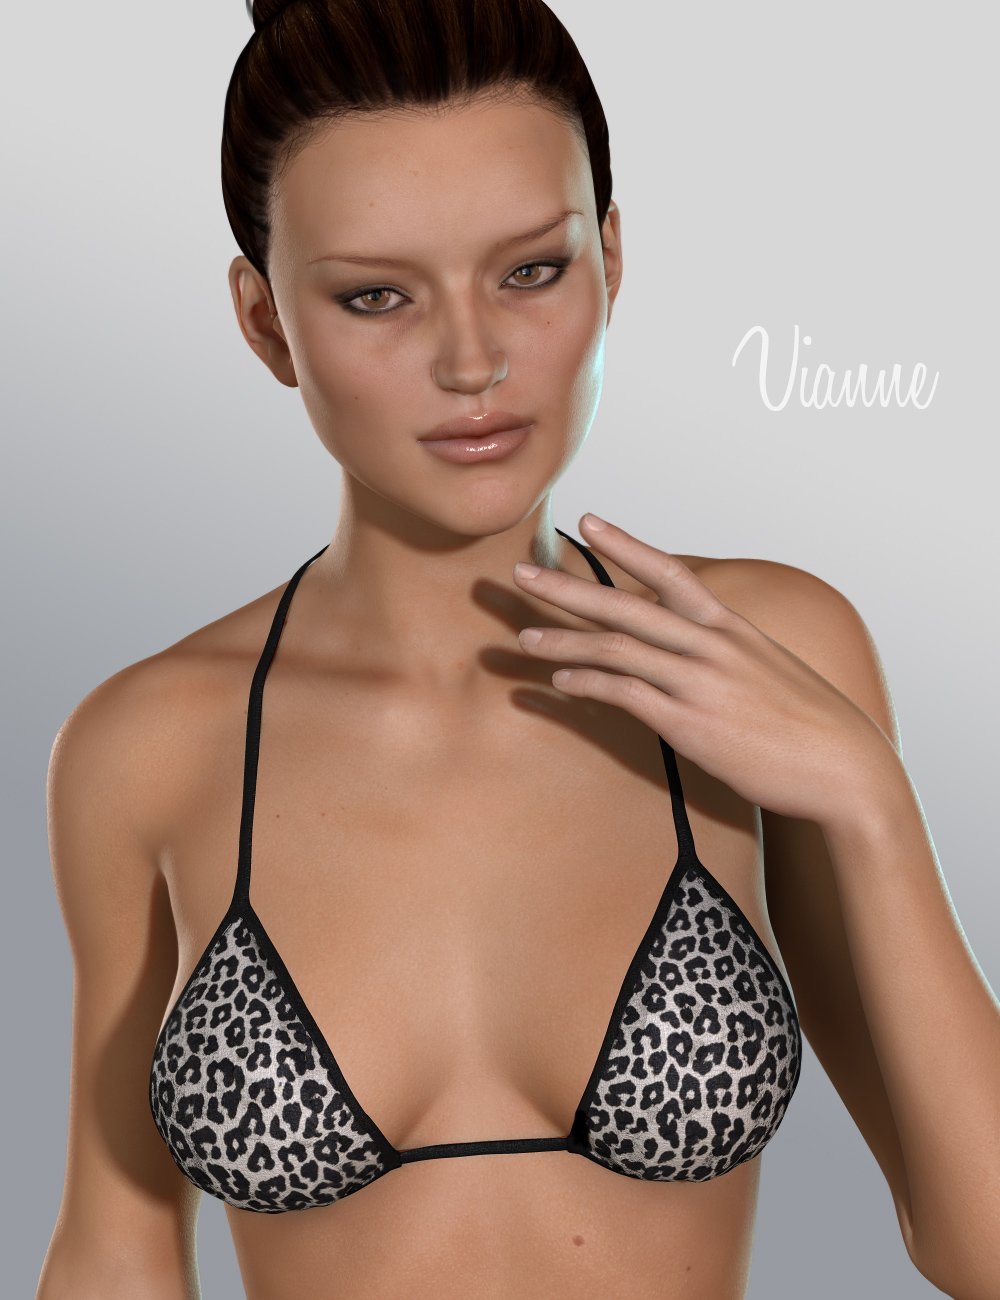 Vianne for Victoria 6 by: , 3D Models by Daz 3D